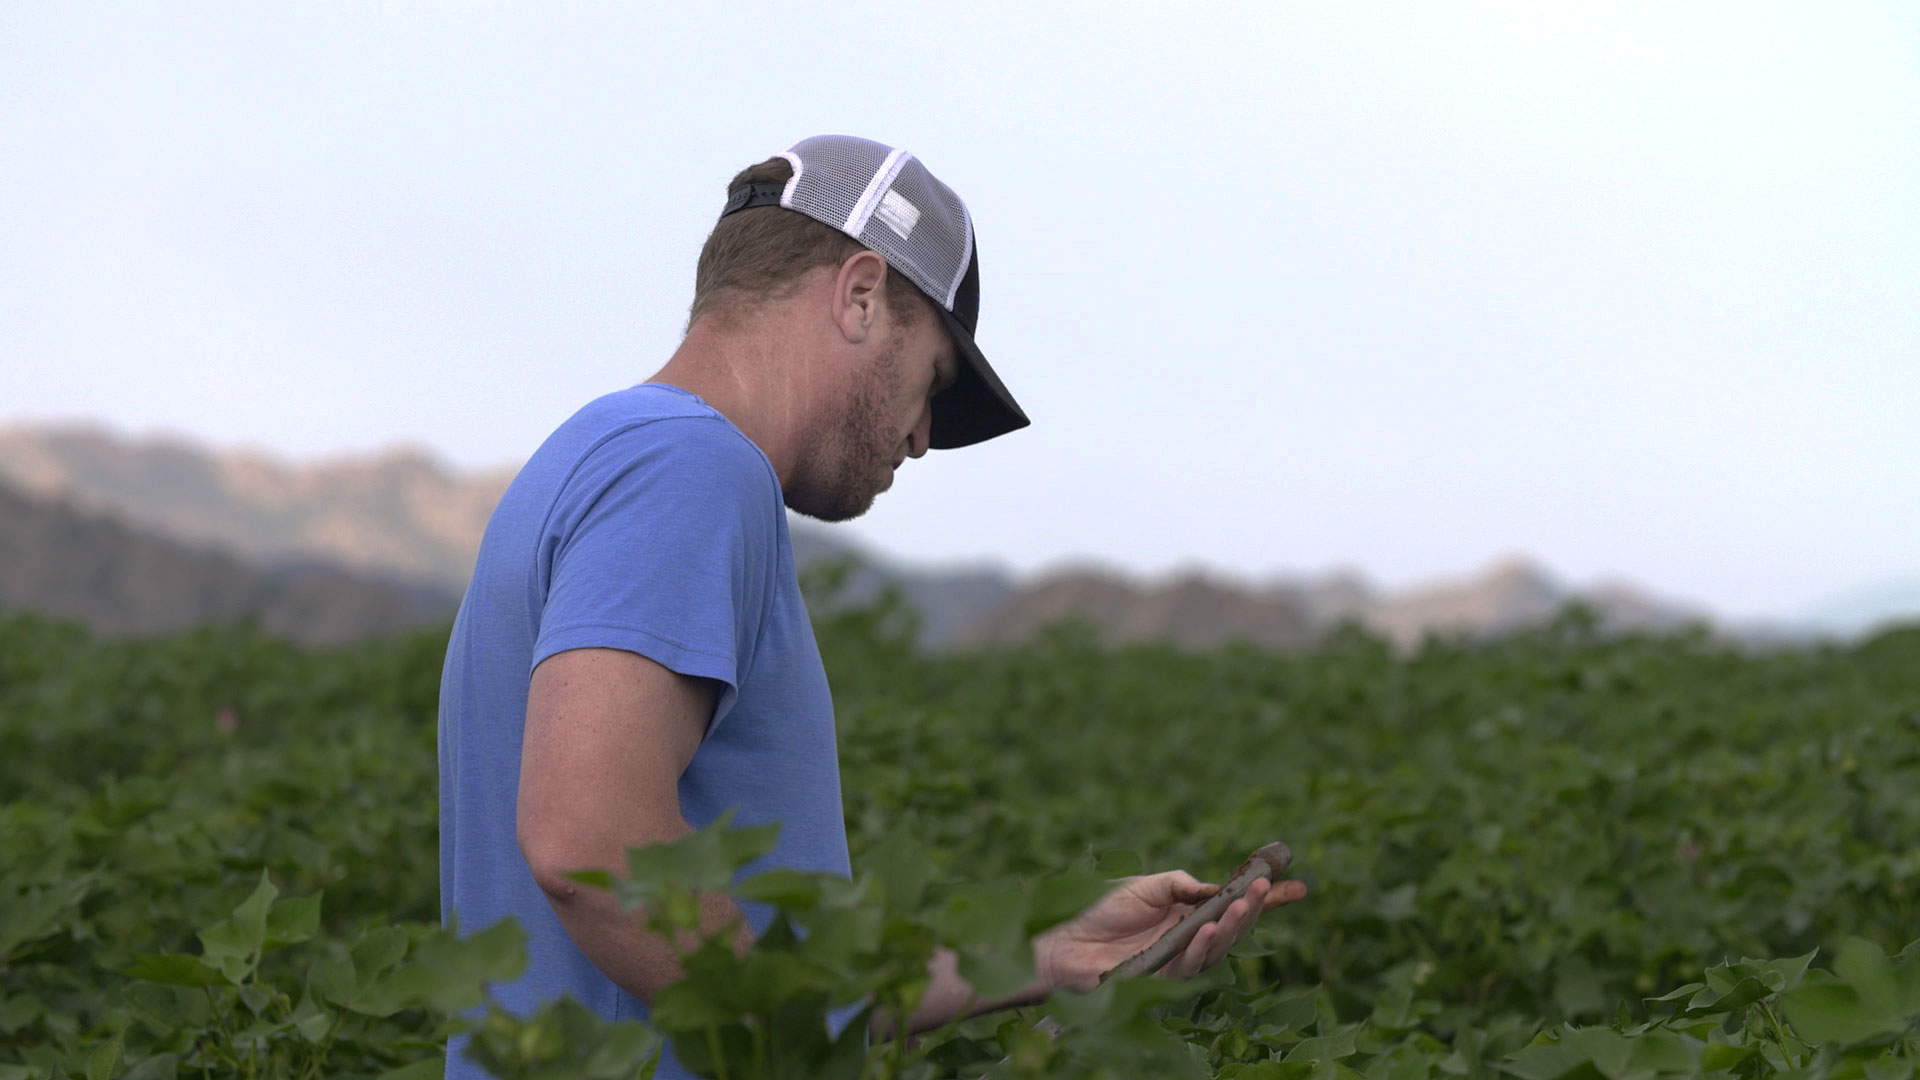 Will Thelander, of Tempe Farming Company, grows crops such as cotton and alfalfa but is also experimenting with guayule, a desert native plant that is being studied for the natural rubber it produces.